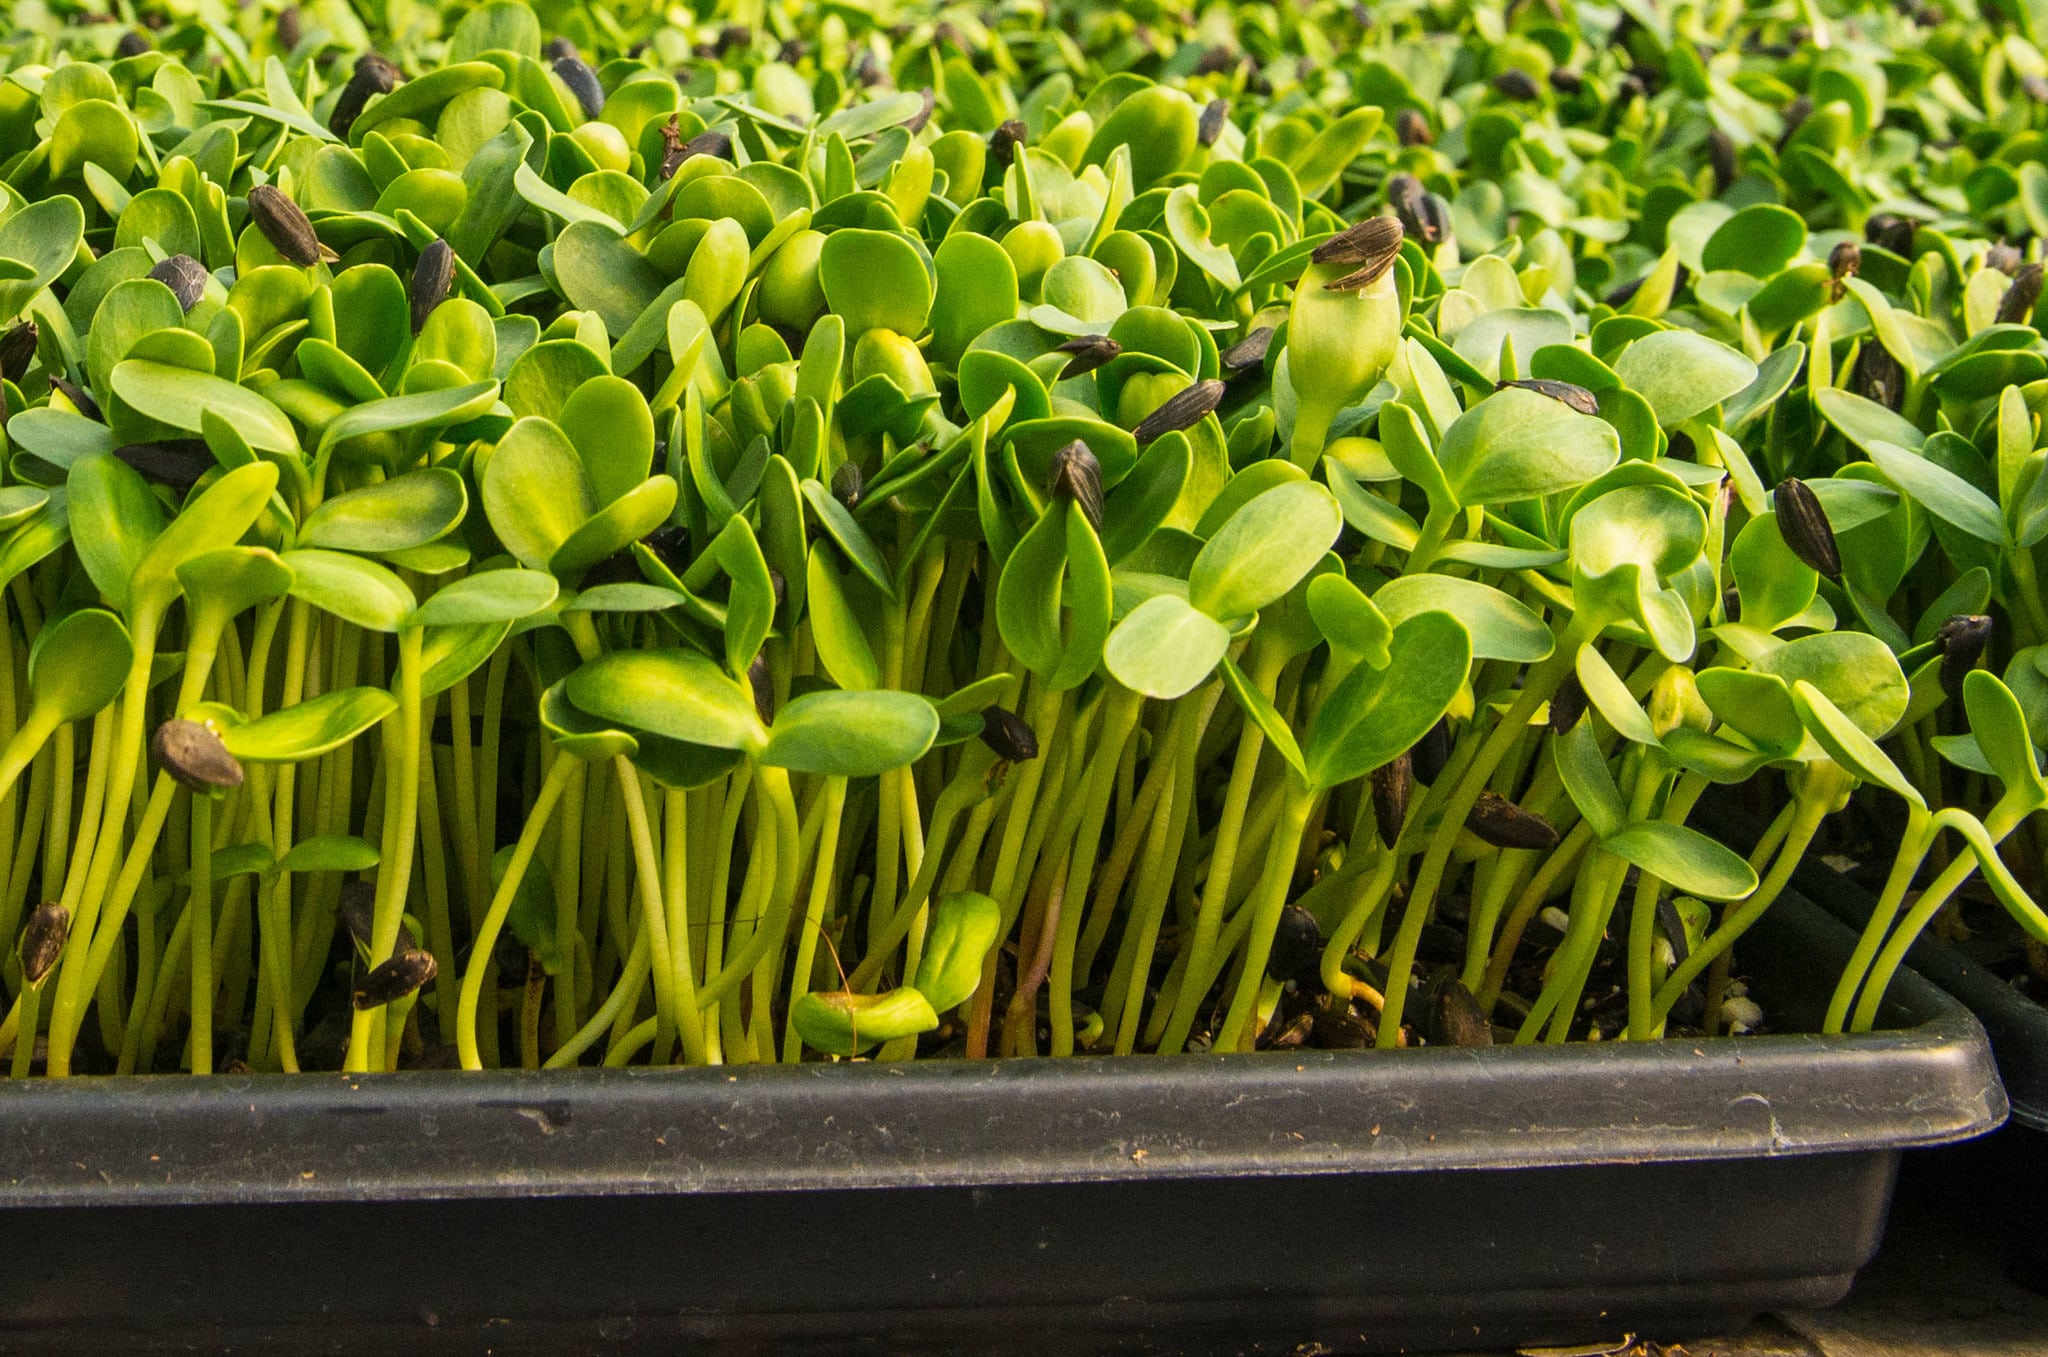 Microgreens are widely used in haute cuisine